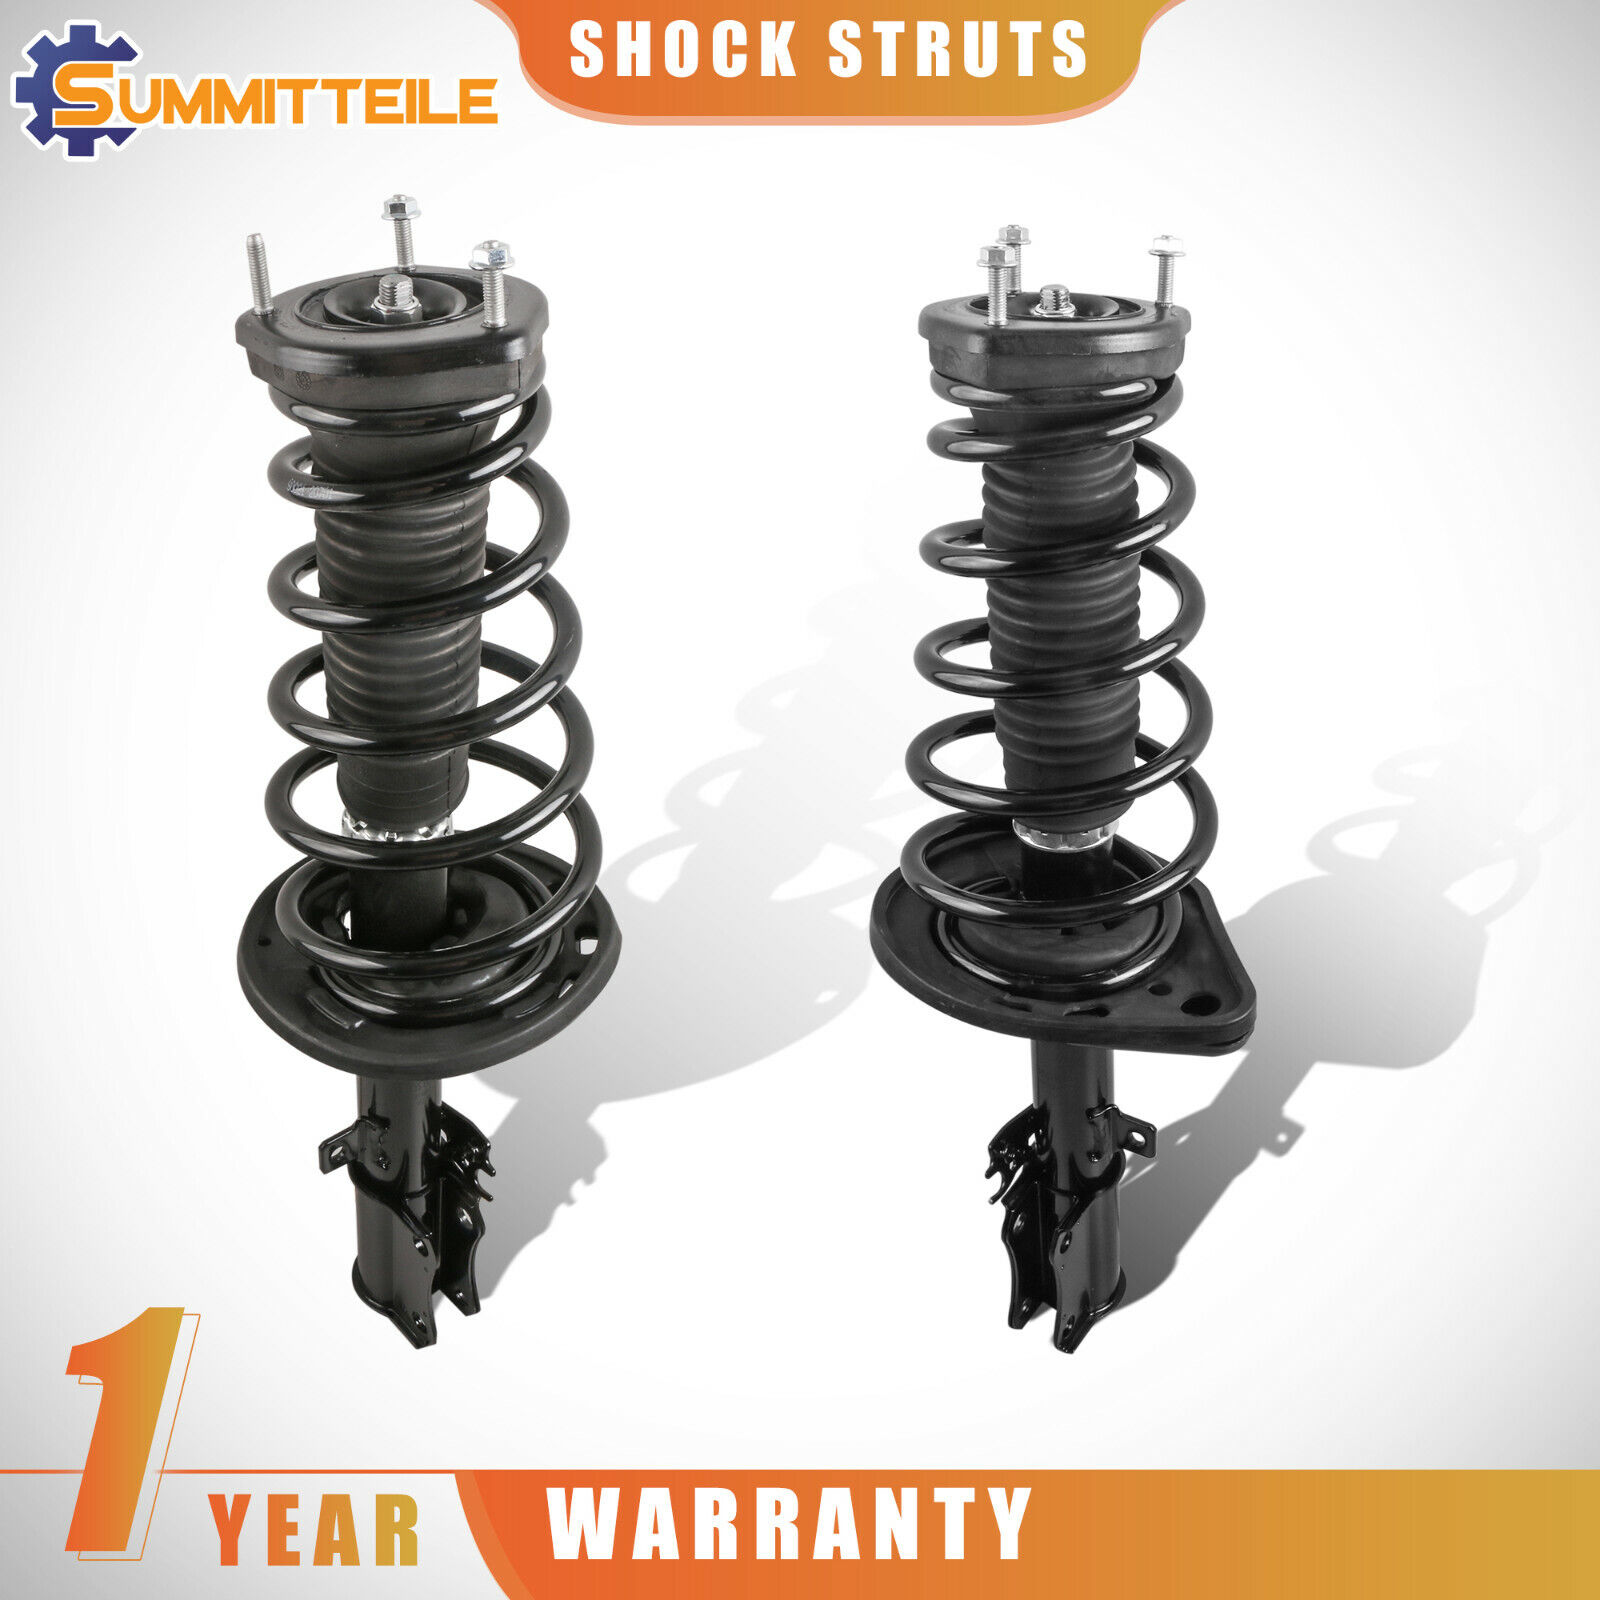 Pair Rear Struts Shock Absorbers For 2007-2011 Lexus ES350 Toyota Camry Avalon